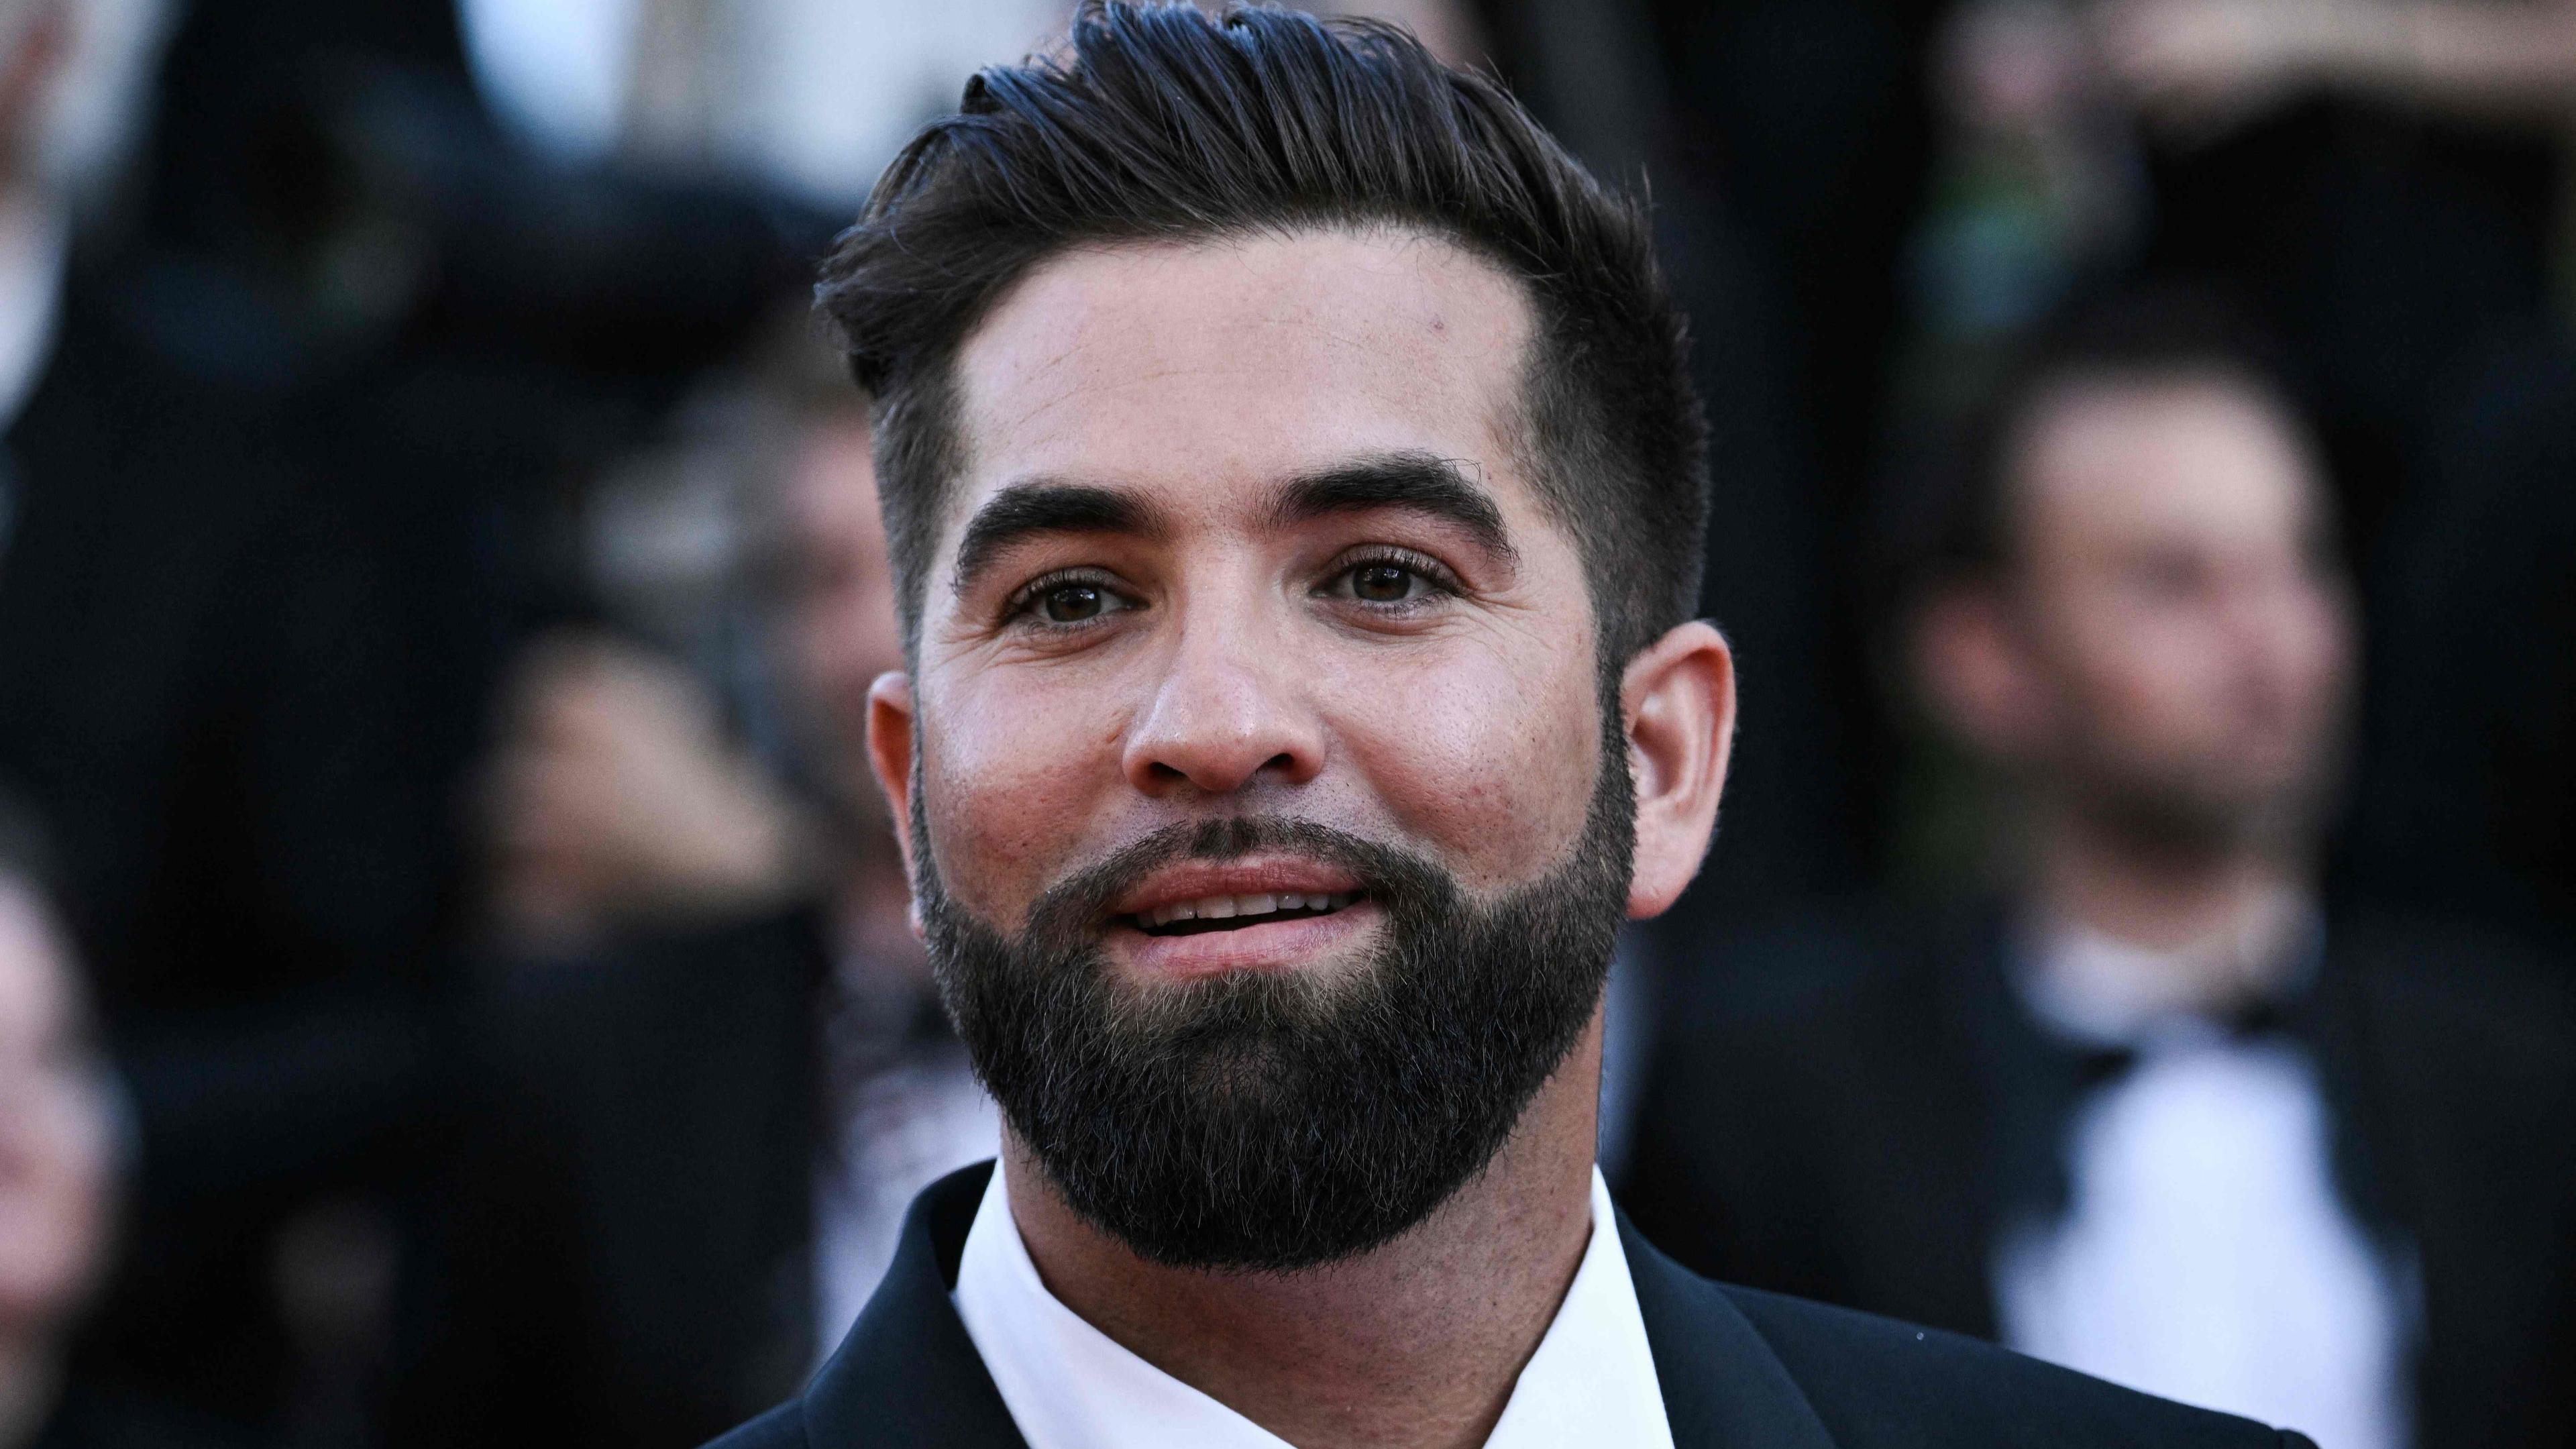 (FILES) French singer Kendji Girac arrives for the screening of the film "Armageddon Time" during the 75th edition of the Cannes Film Festival in Cannes, southern France, on May 19, 2022. French singer Kendji Girac, seriously injured by a gunshot, is between life and death, a source close to the case told AFP on April 22, 2024. (Photo by LOIC VENANCE / AFP)